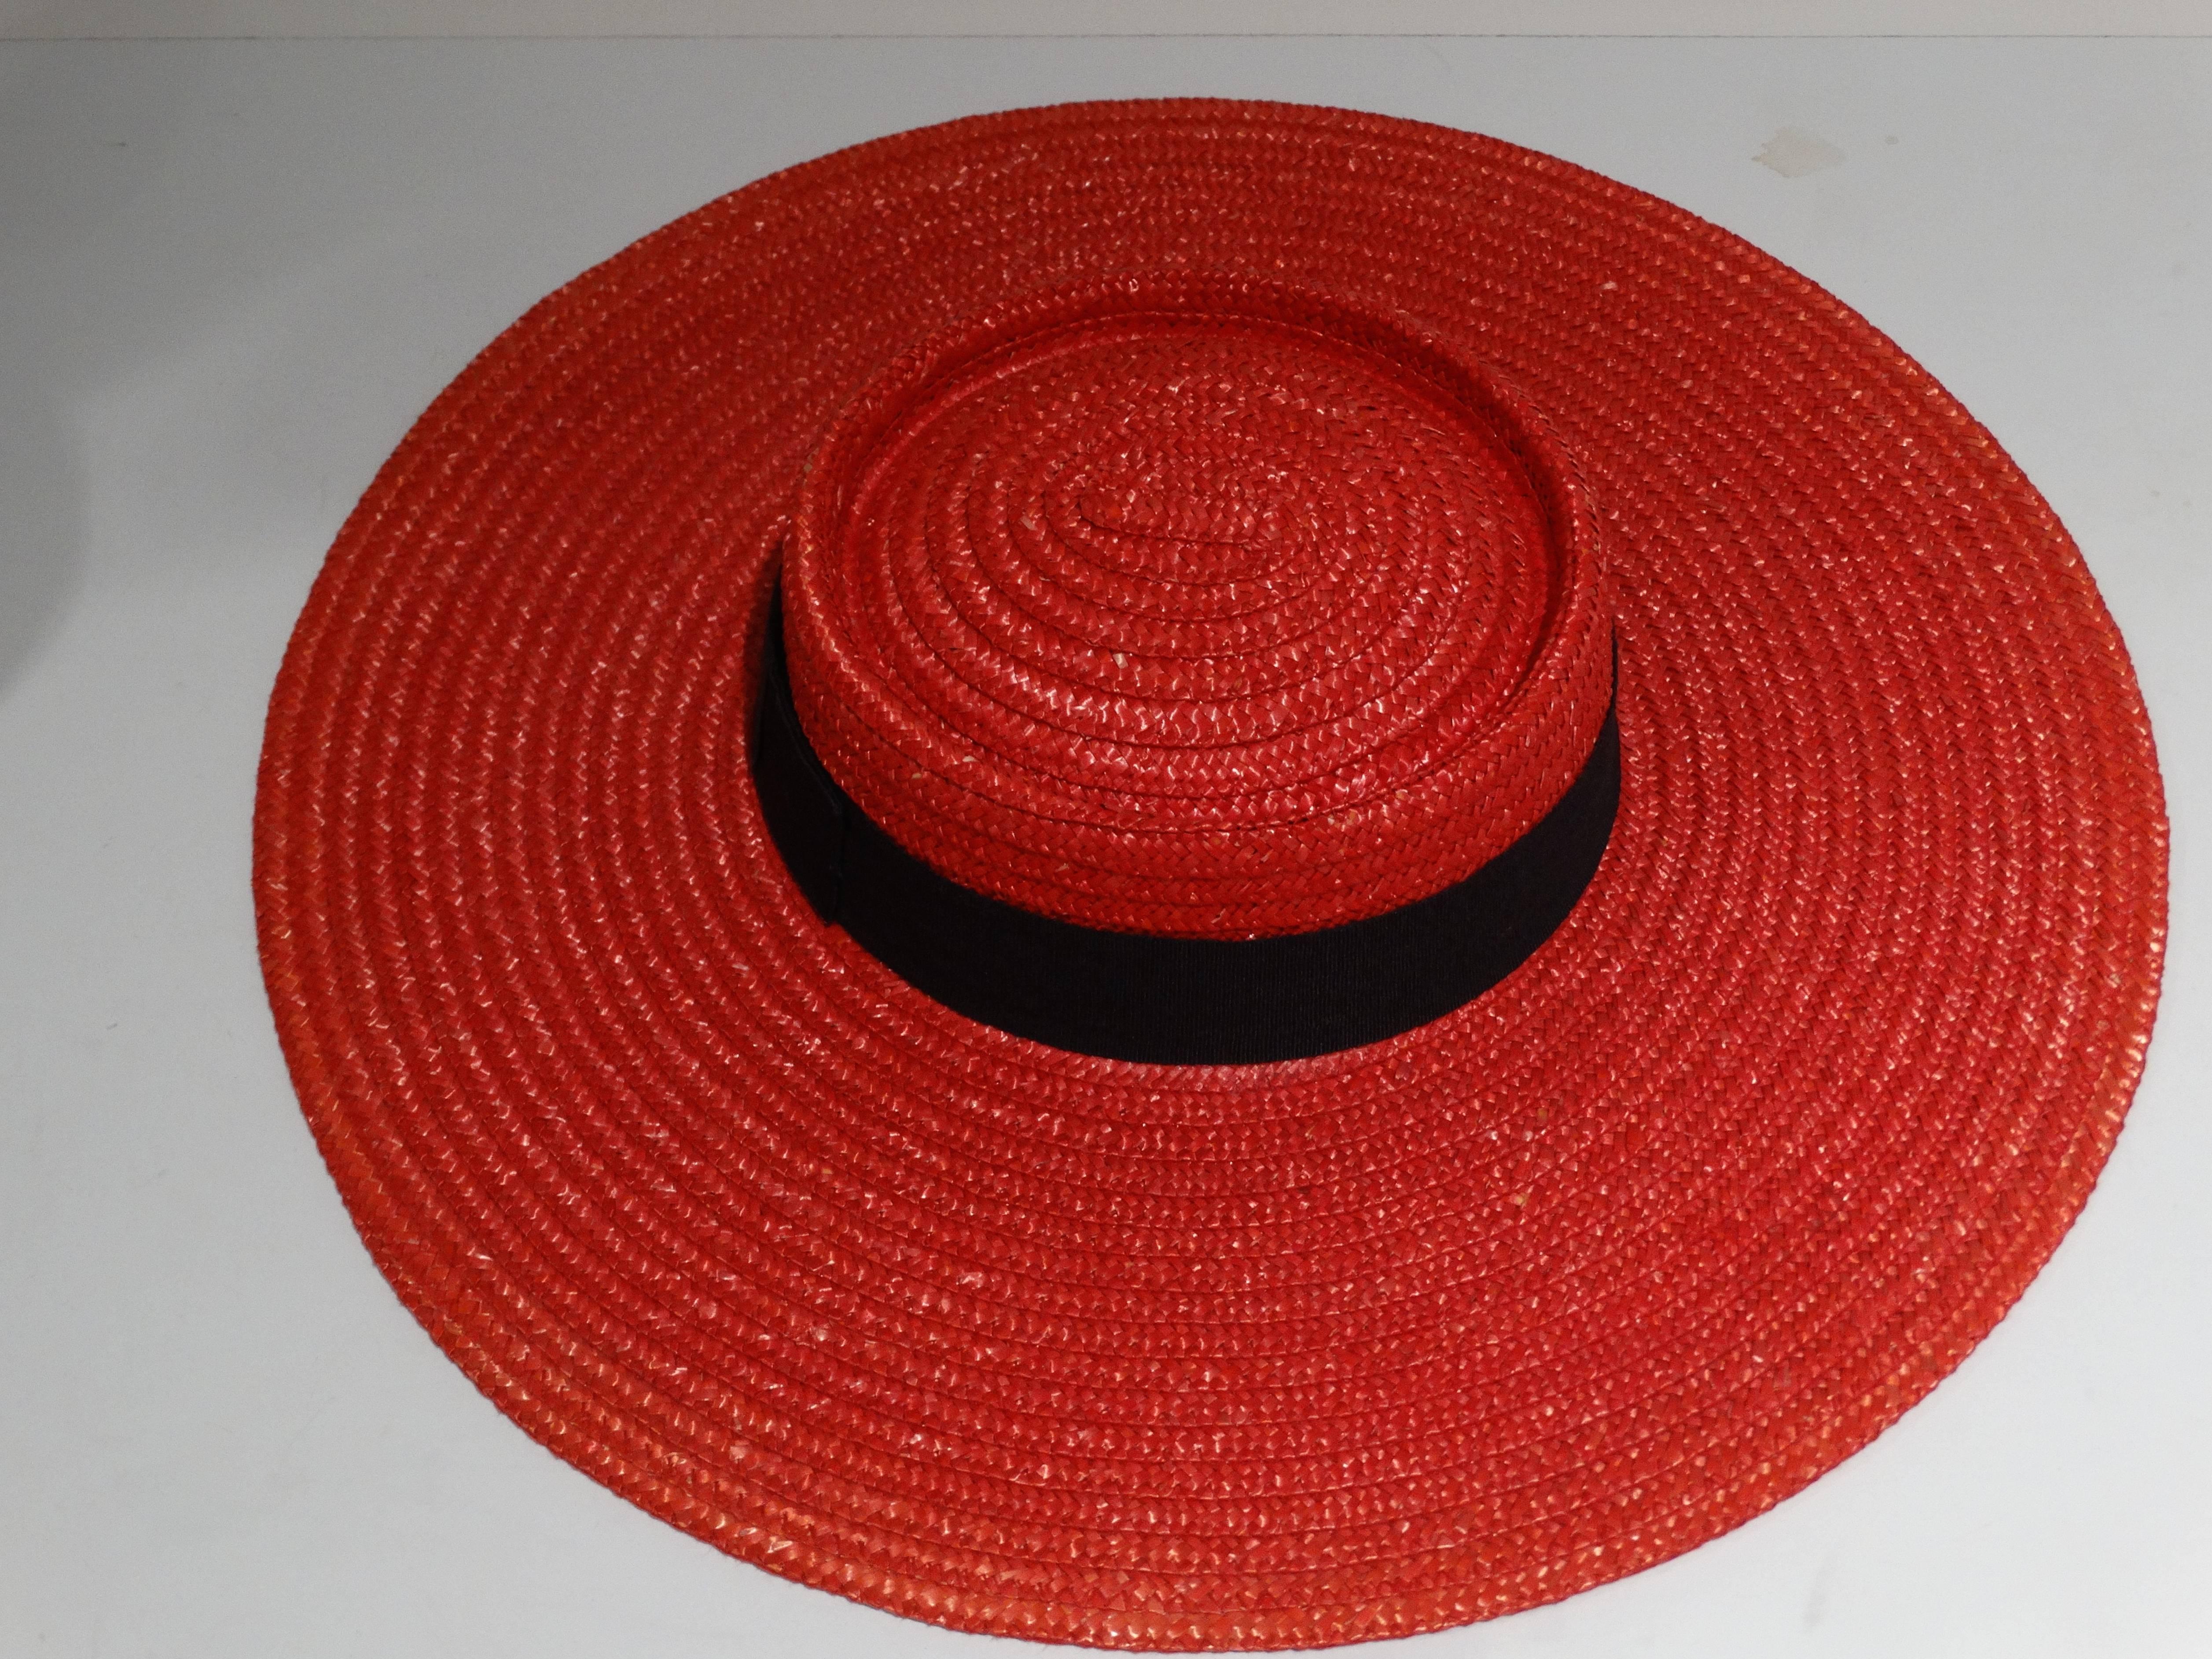 A true one of kind piece, created in the 80's! This limited edition a wide brim red Gucci straw hat with a black ribbon bow with the gold GG logo is sure to turn heads! The bow is to be worn in the back, hat look best tilted to one side.